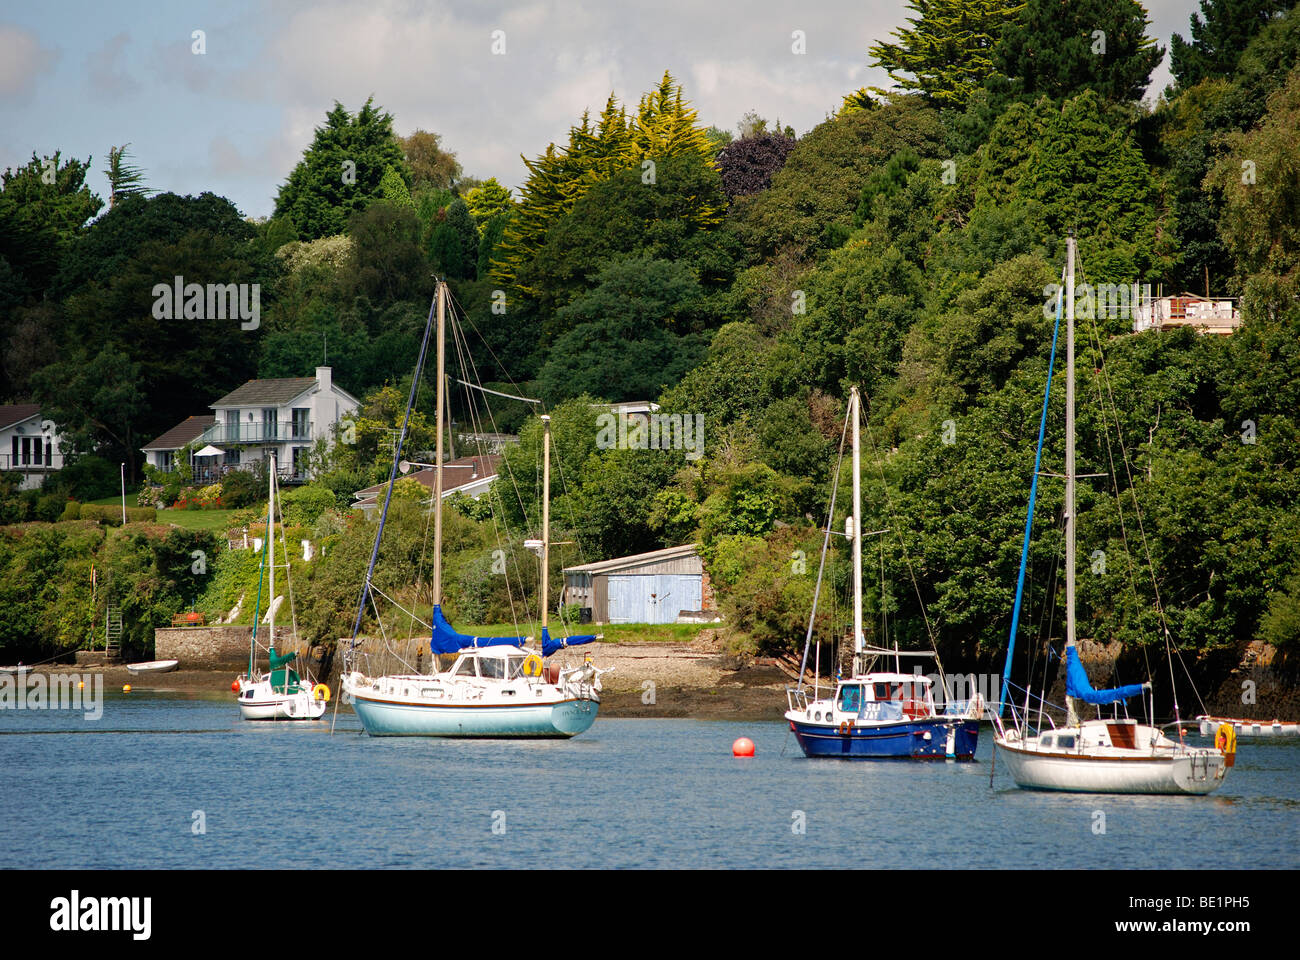 yachts in restronguet creek on the river fal near truro in cornwall, uk Stock Photo